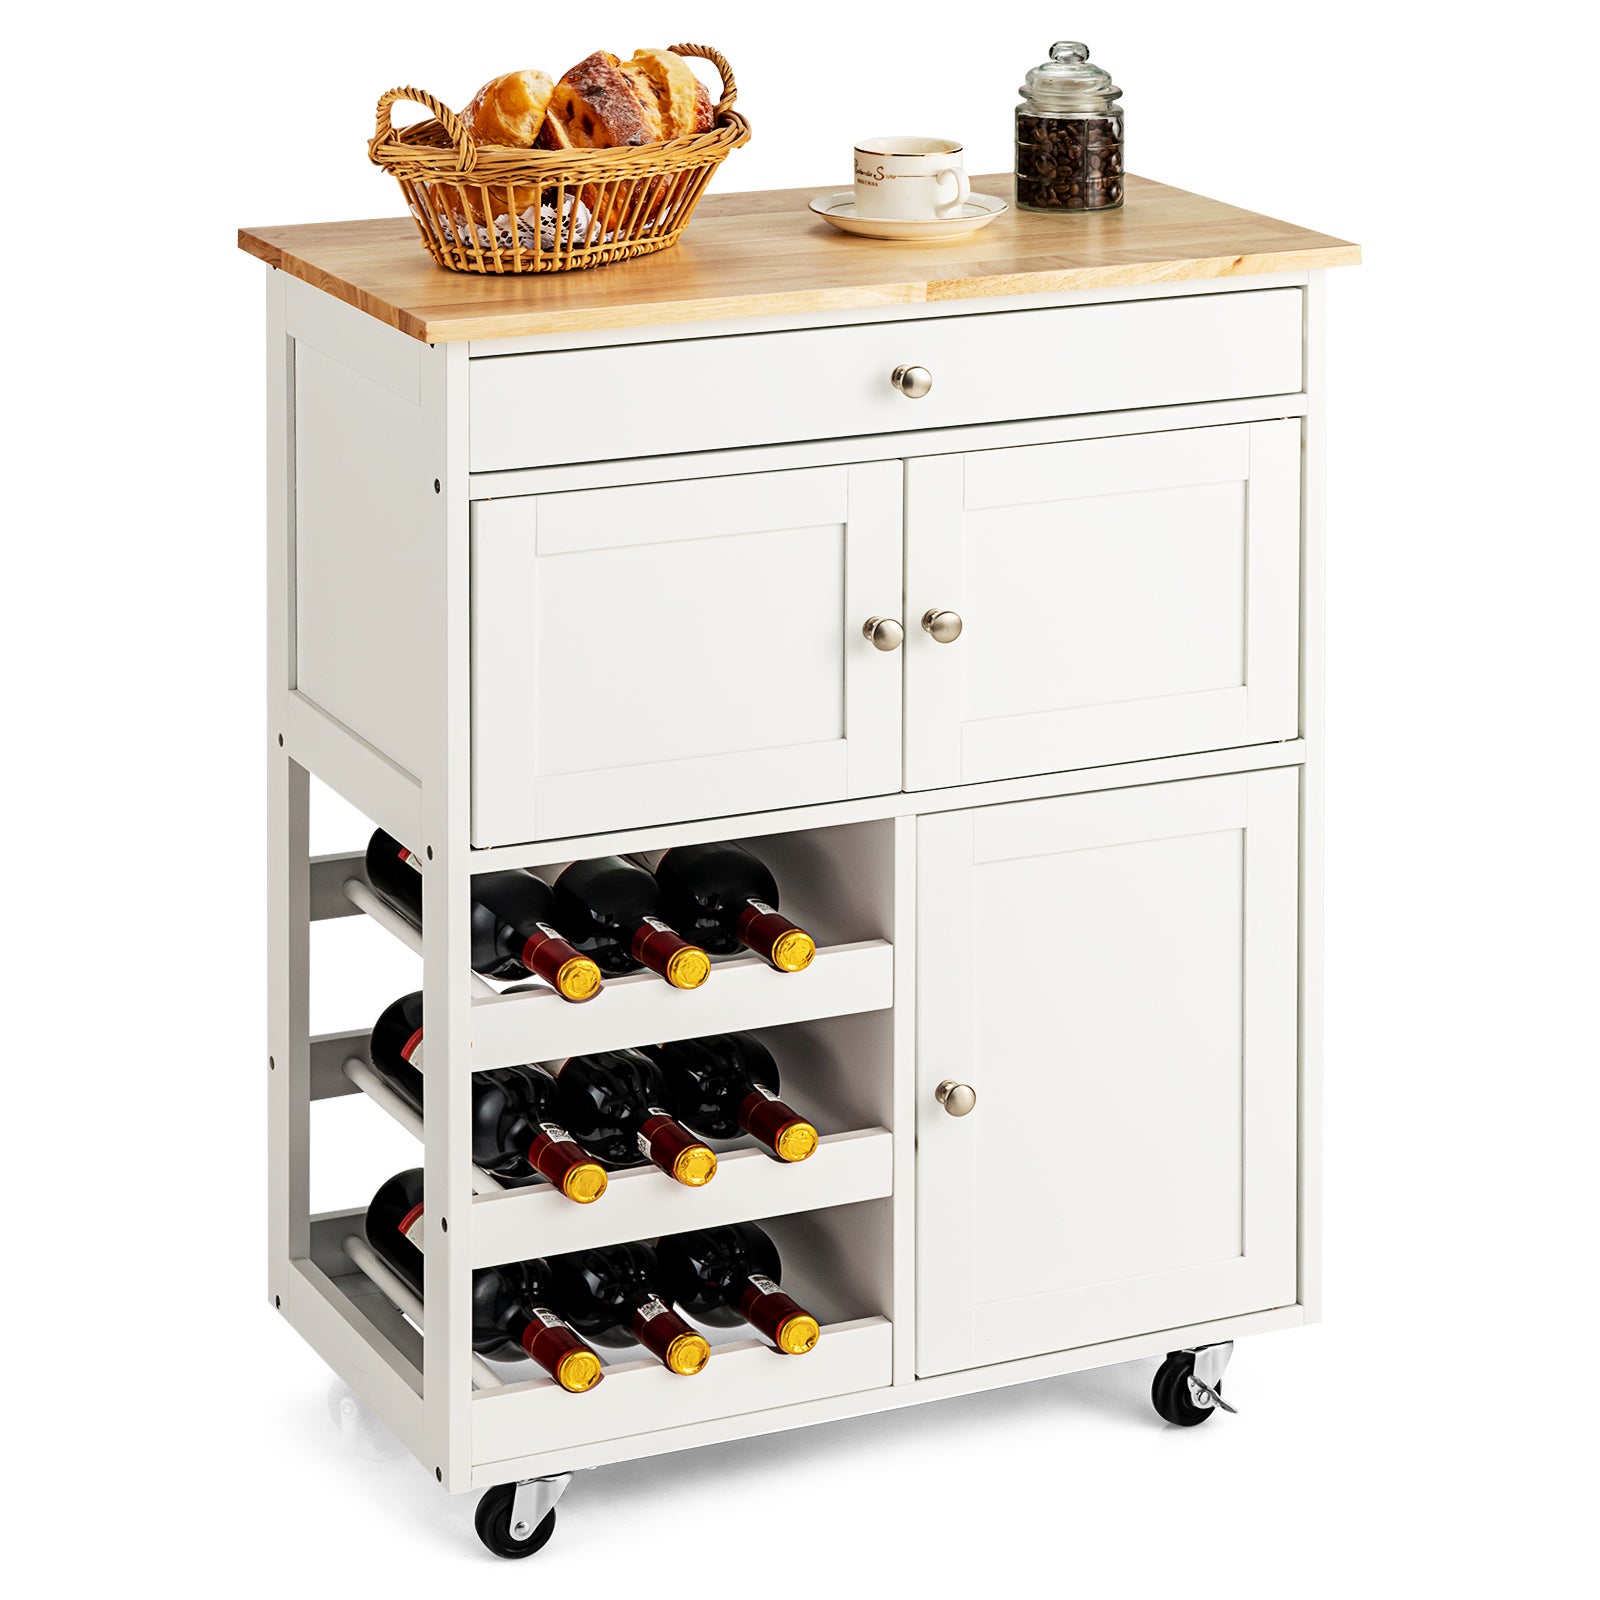 CADUKE Countertop Wine Rack with Glass Holder Tabletop Wine Rack with Wood Counter Wine Organizer Shelves Hold 6 Bottles and 4 Glasses Perfect for Cabinet Kitchen Bar Office Brown 